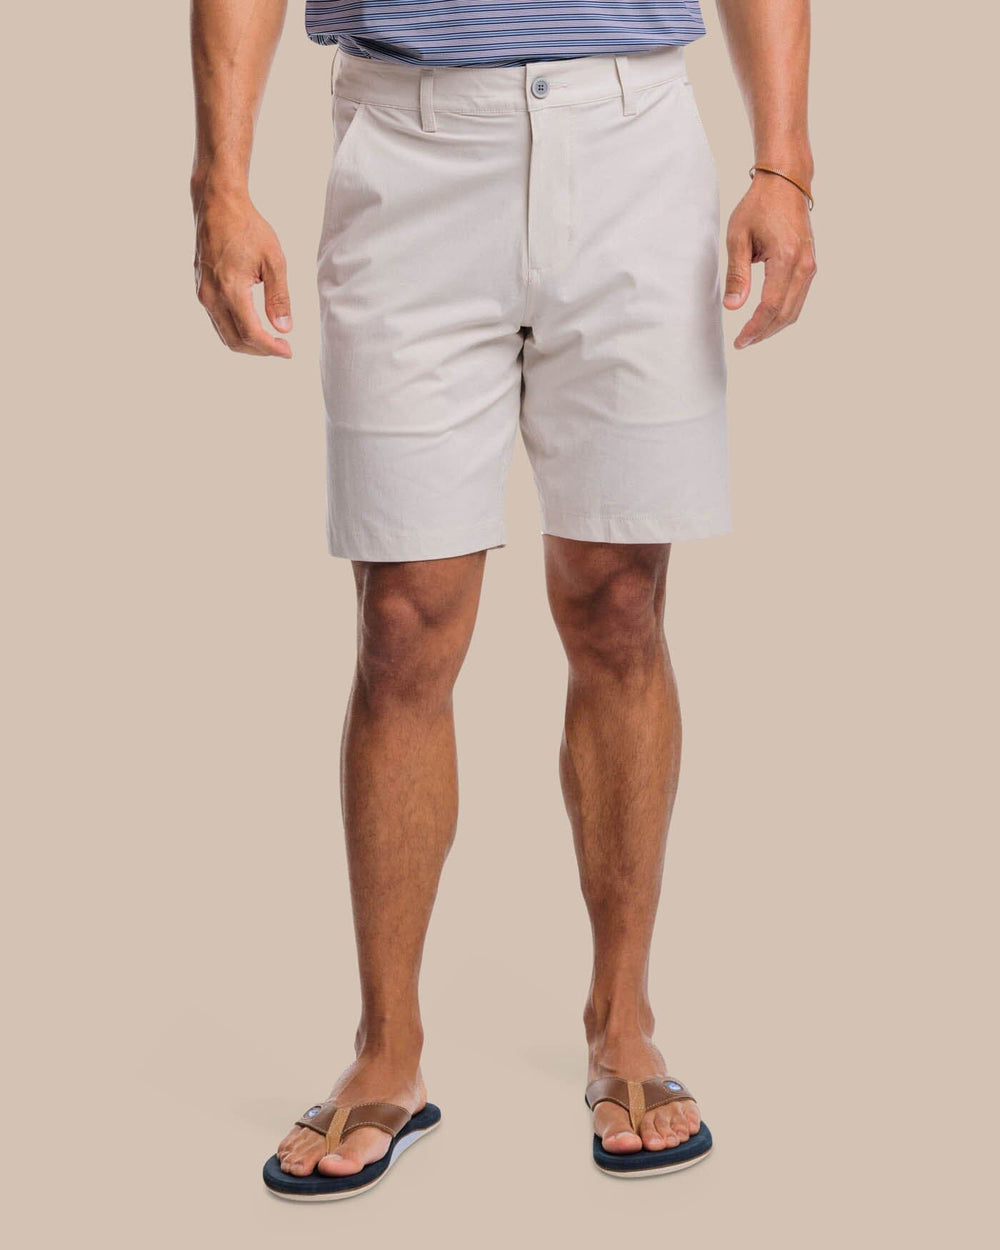 The front view of the Southern Tide T3 Gulf 9 Inch Performance Short by Southern Tide - Stone